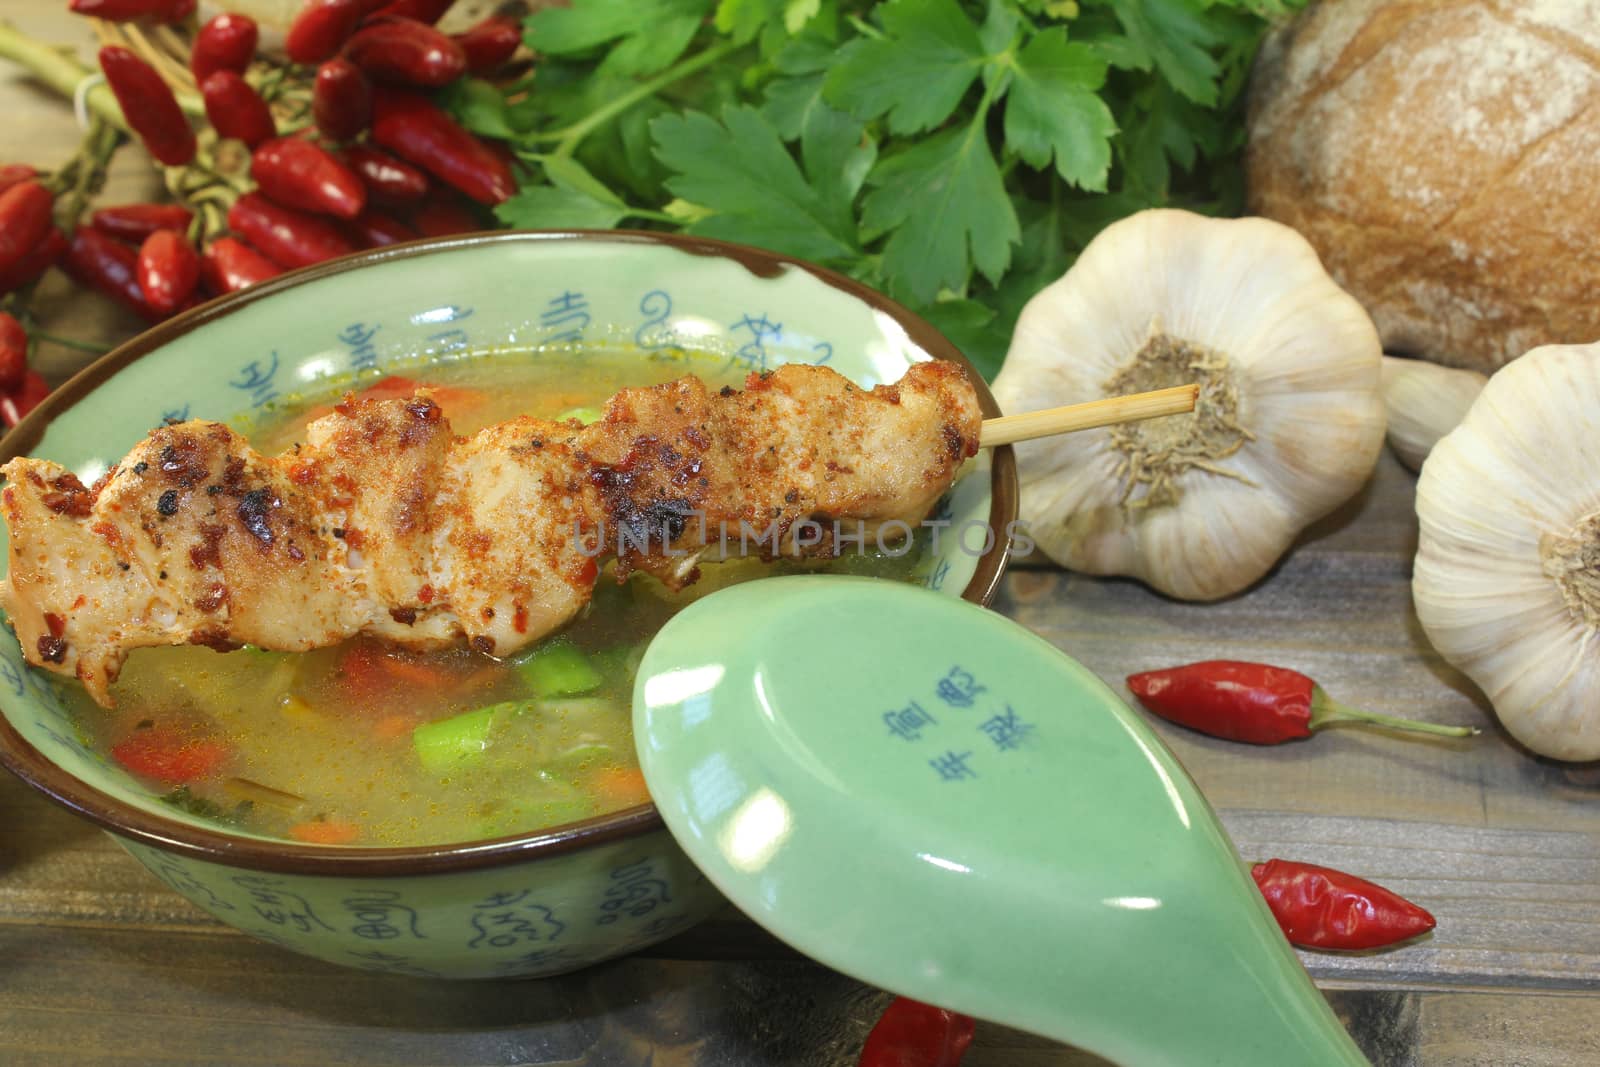 Poultry consomme with chicken skewers and smooth parsley by discovery